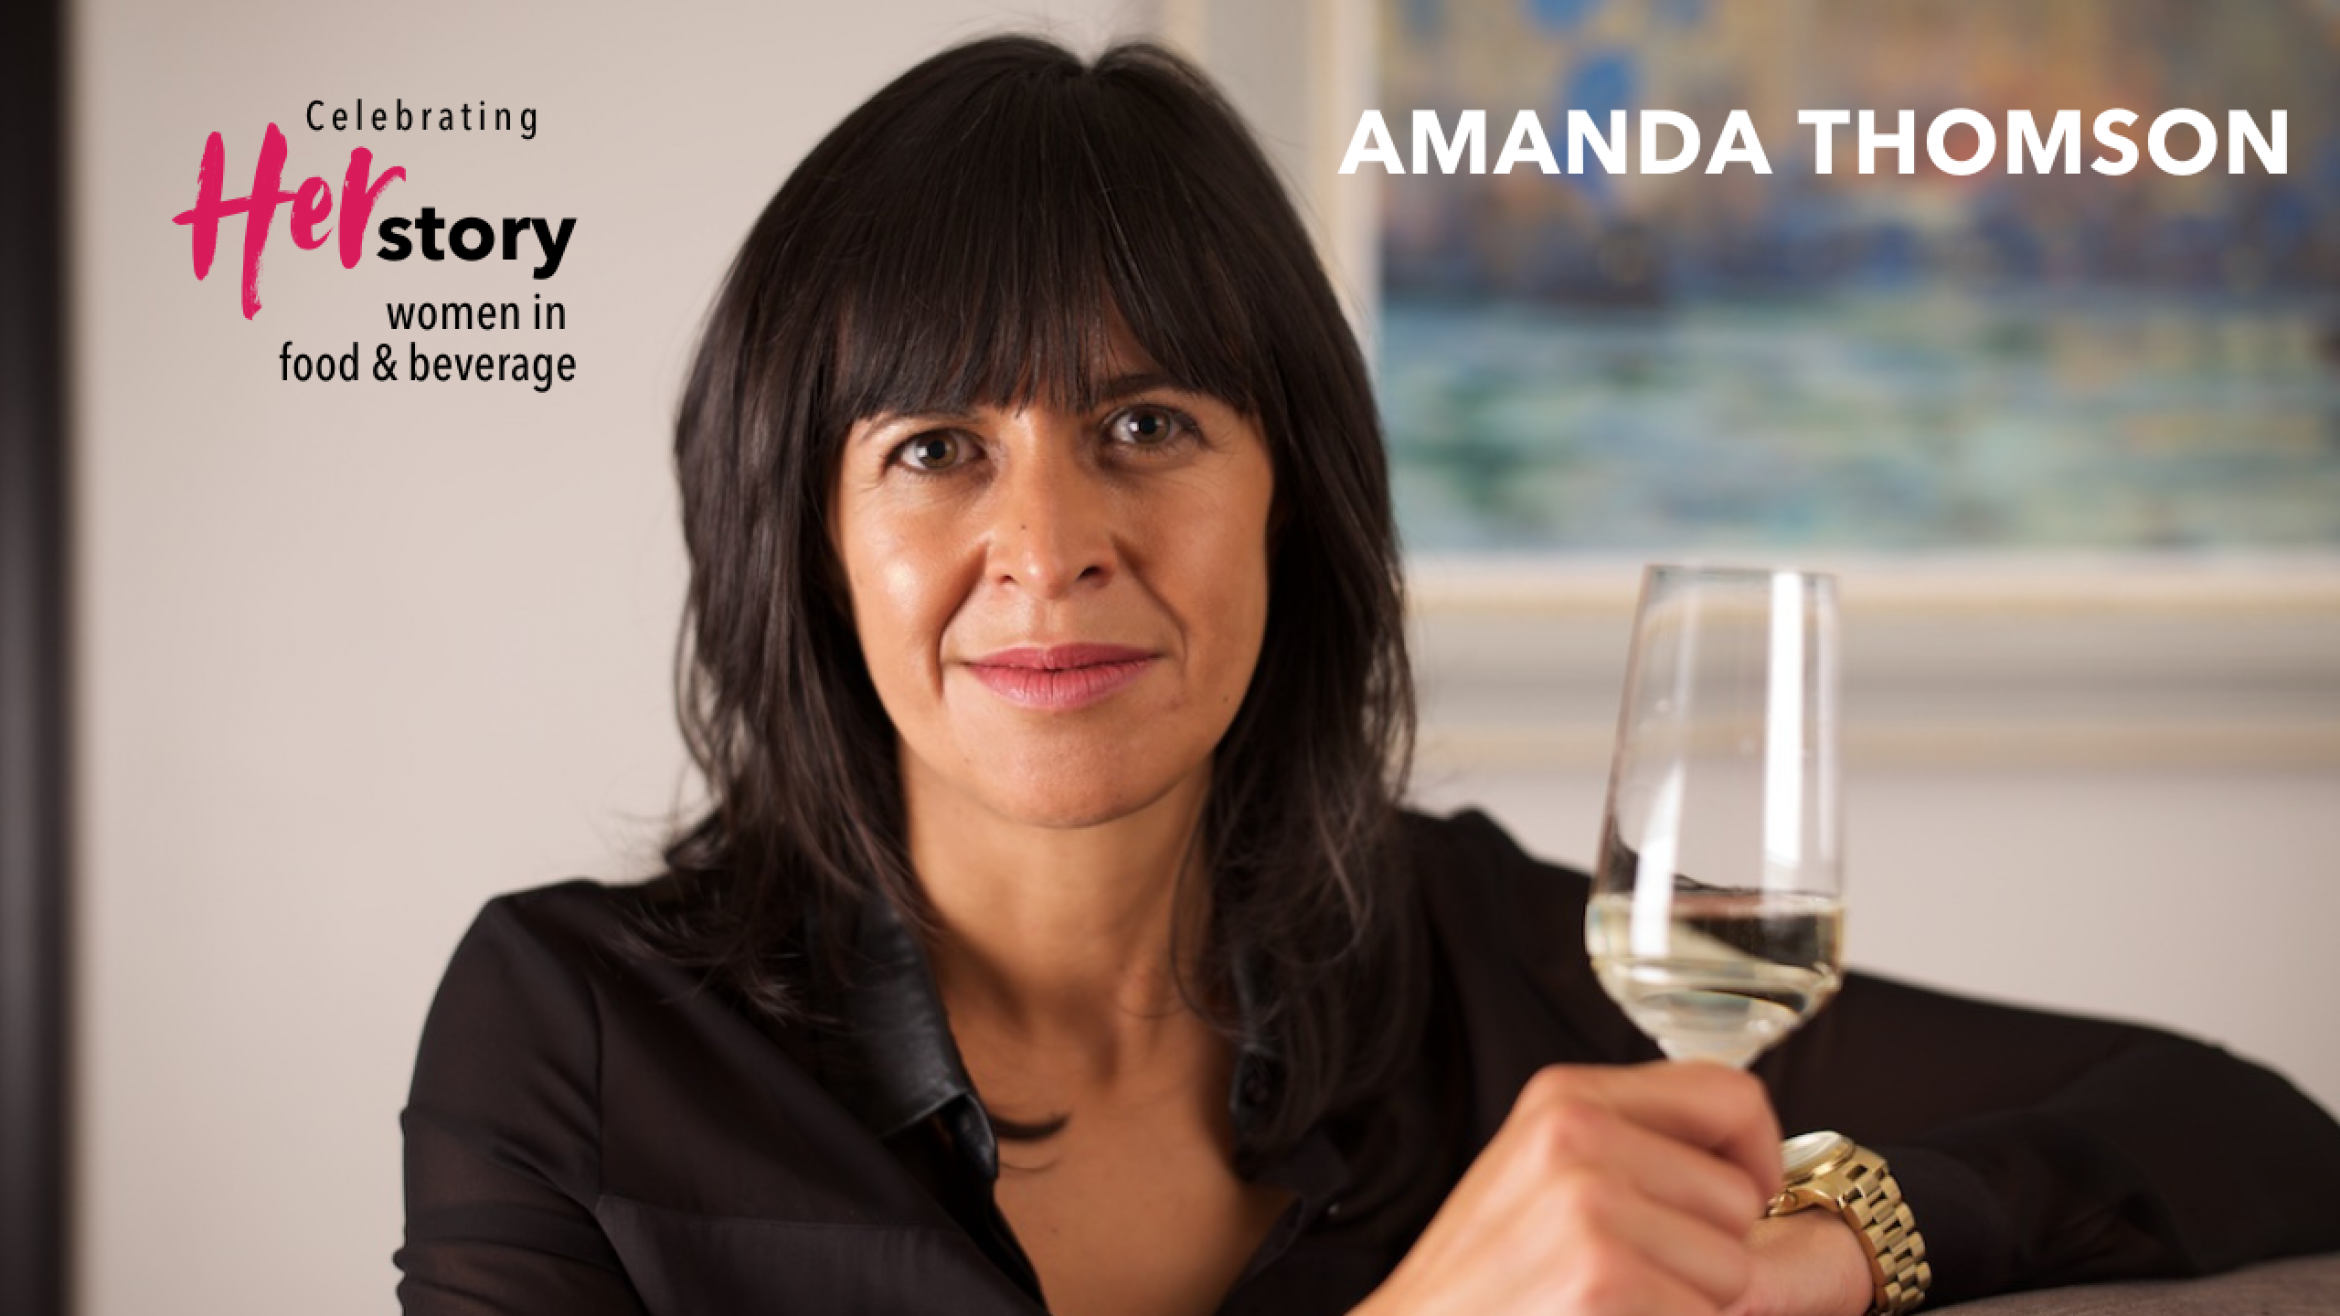 Woman with long dark hair wearing a black shirt leans on a high table while holding a glass of alcohol-free white wine Amanda Thomson, Thomson & Scott, Women Making HERStory with greater transparency in wine labeling.